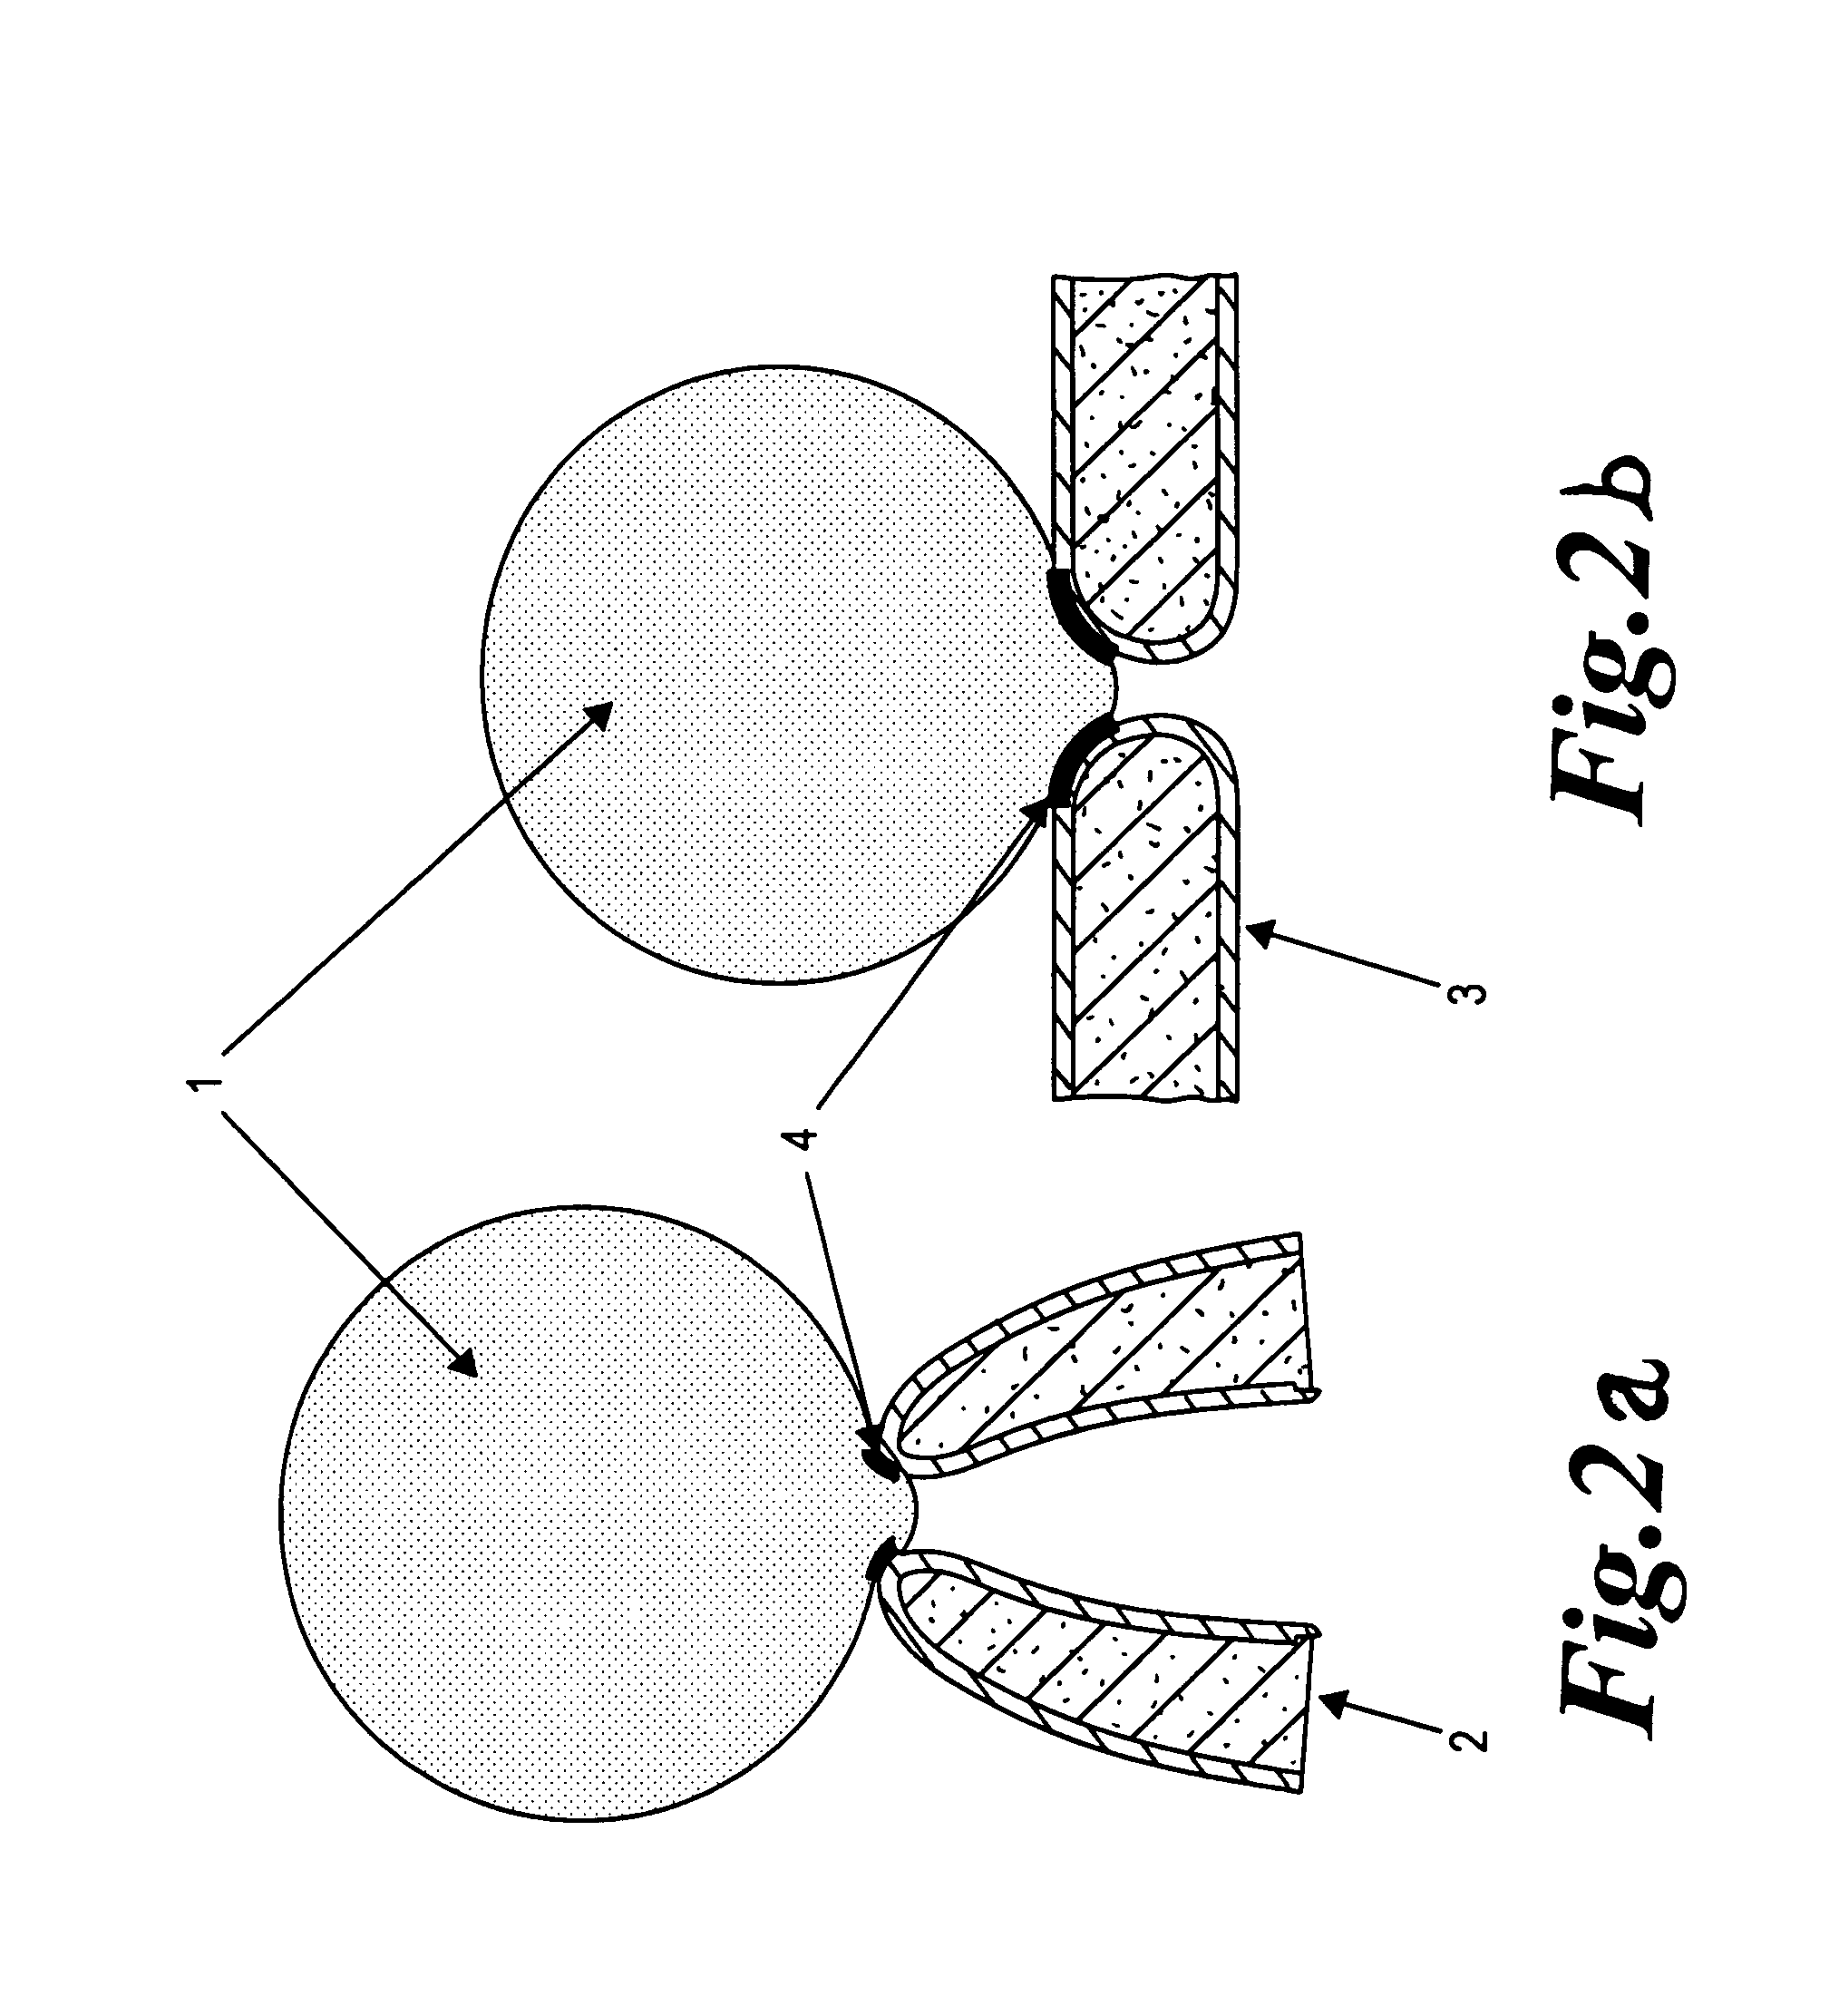 Substrate and method for measuring the electro-physiological properties of cell membranes